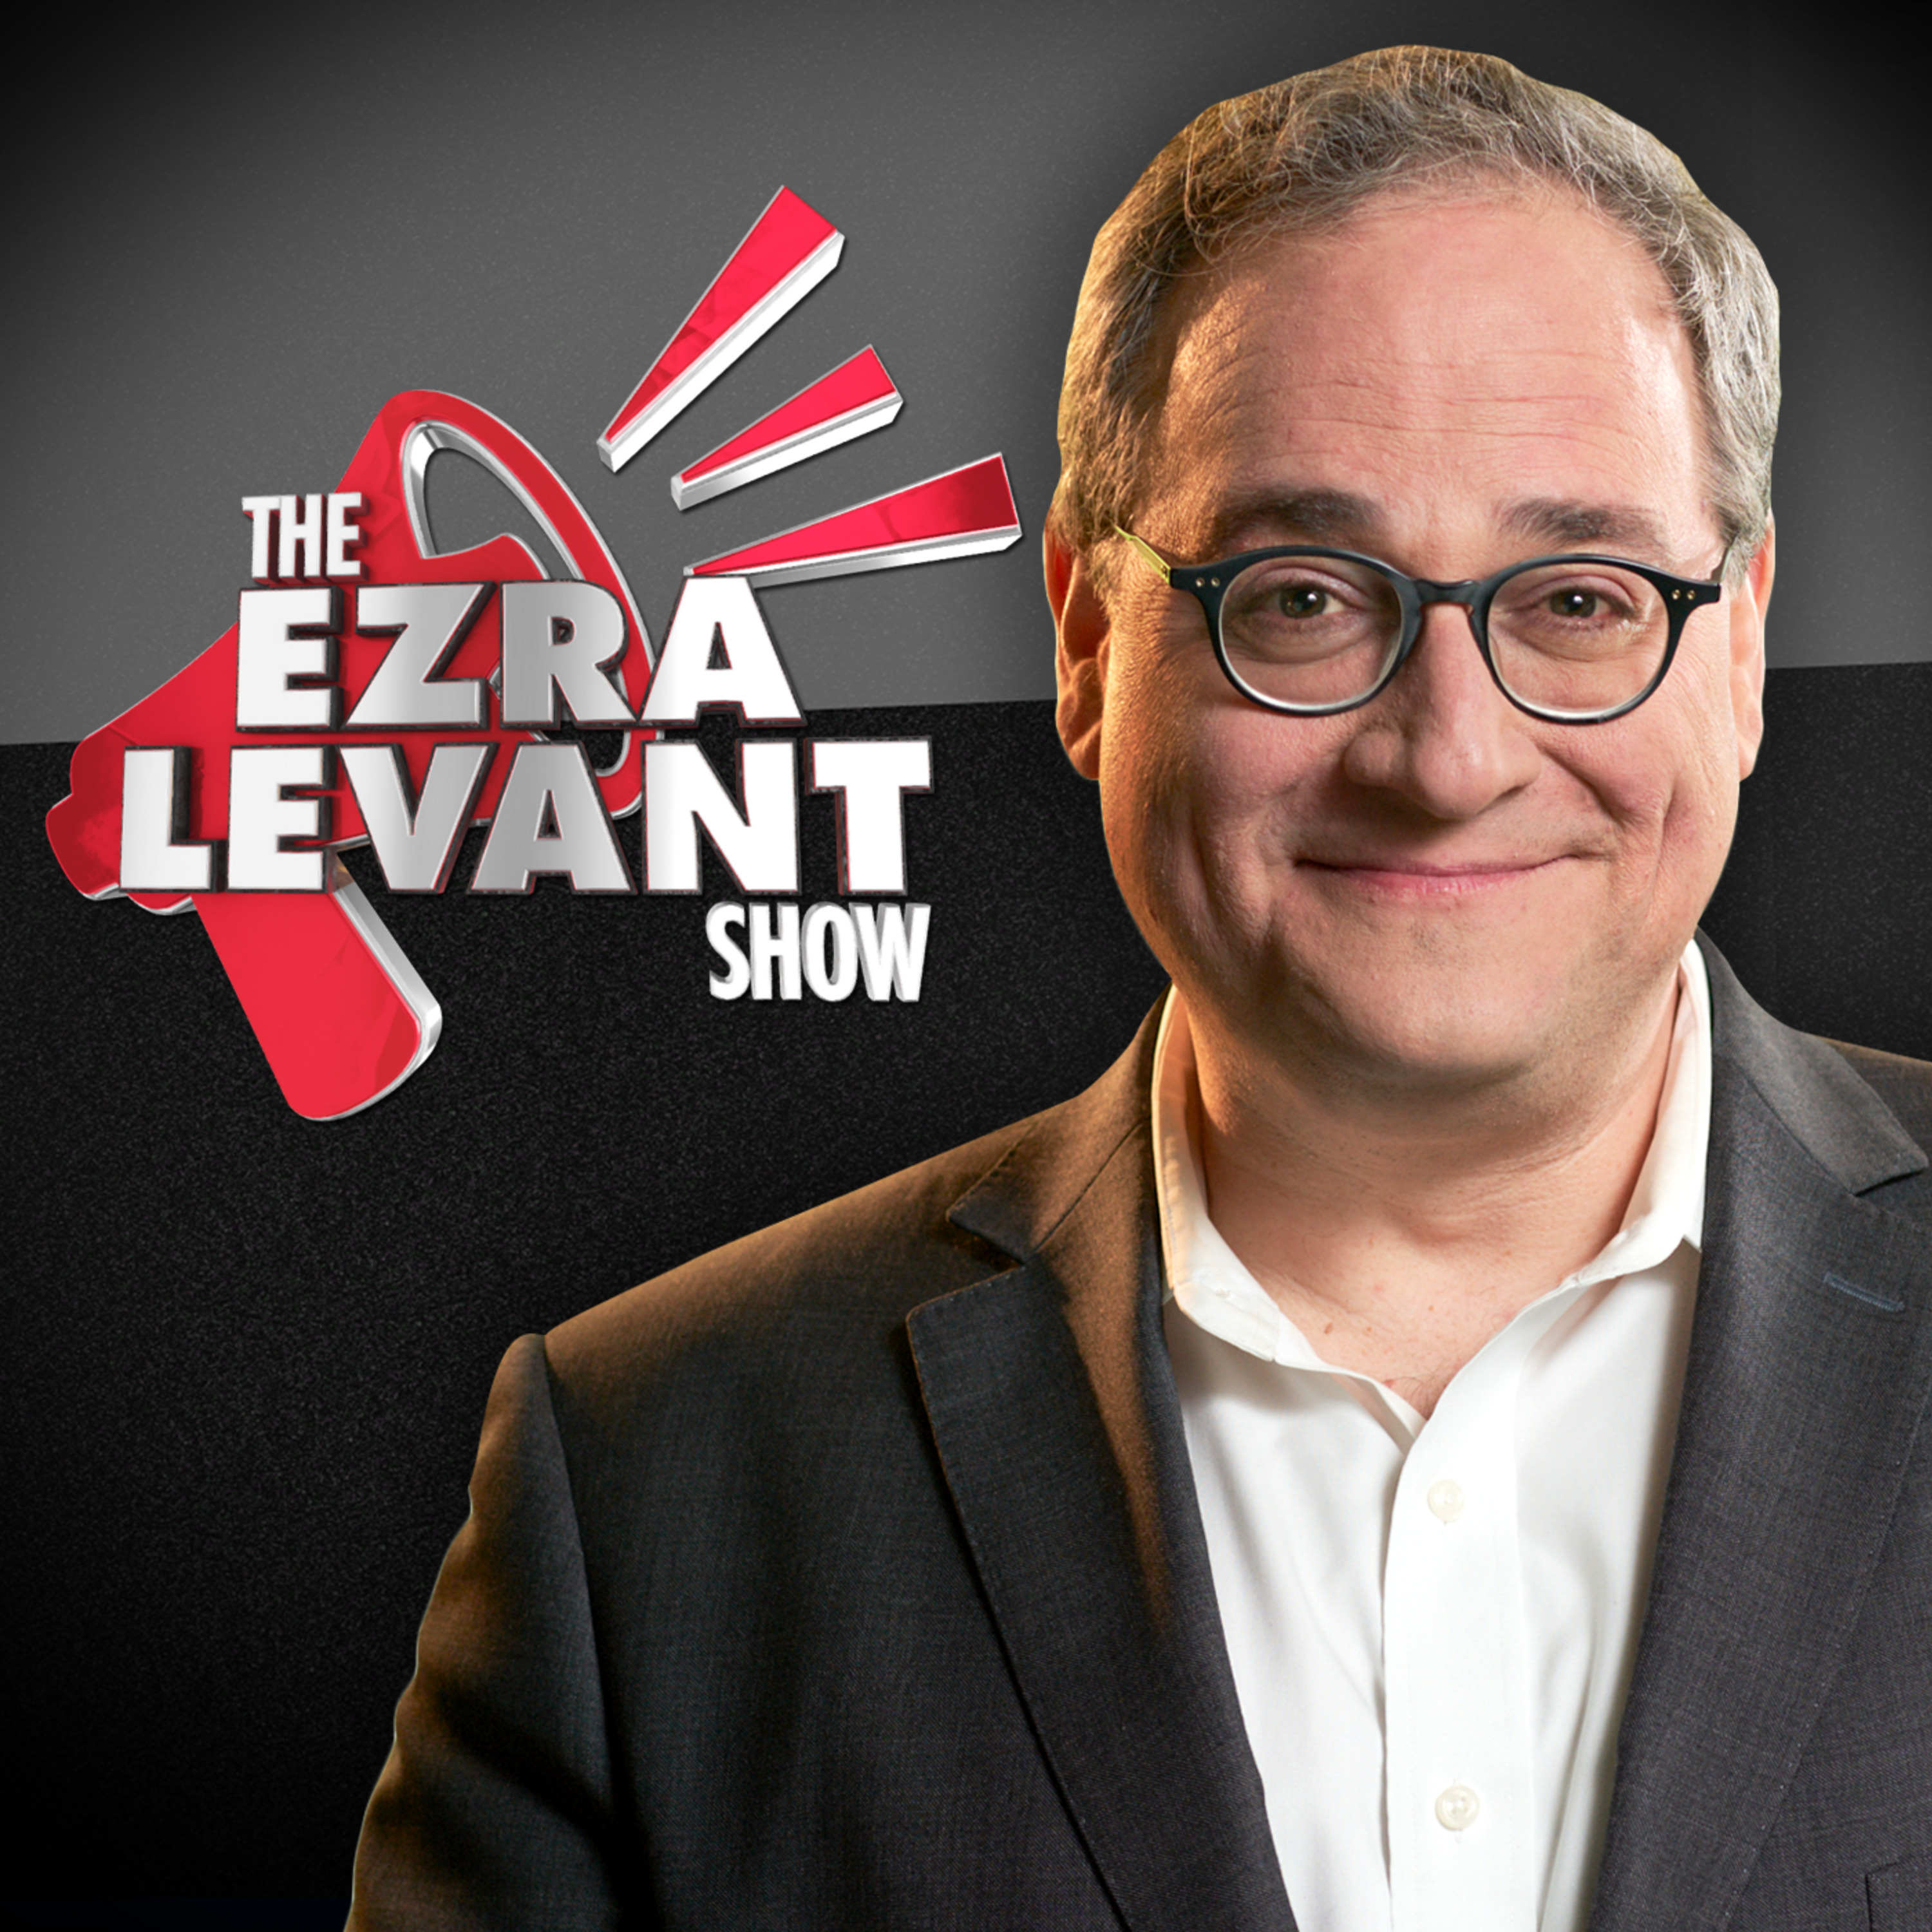 EZRA LEVANT | Disinformation gaslighting and narrative control clouds the search for truth